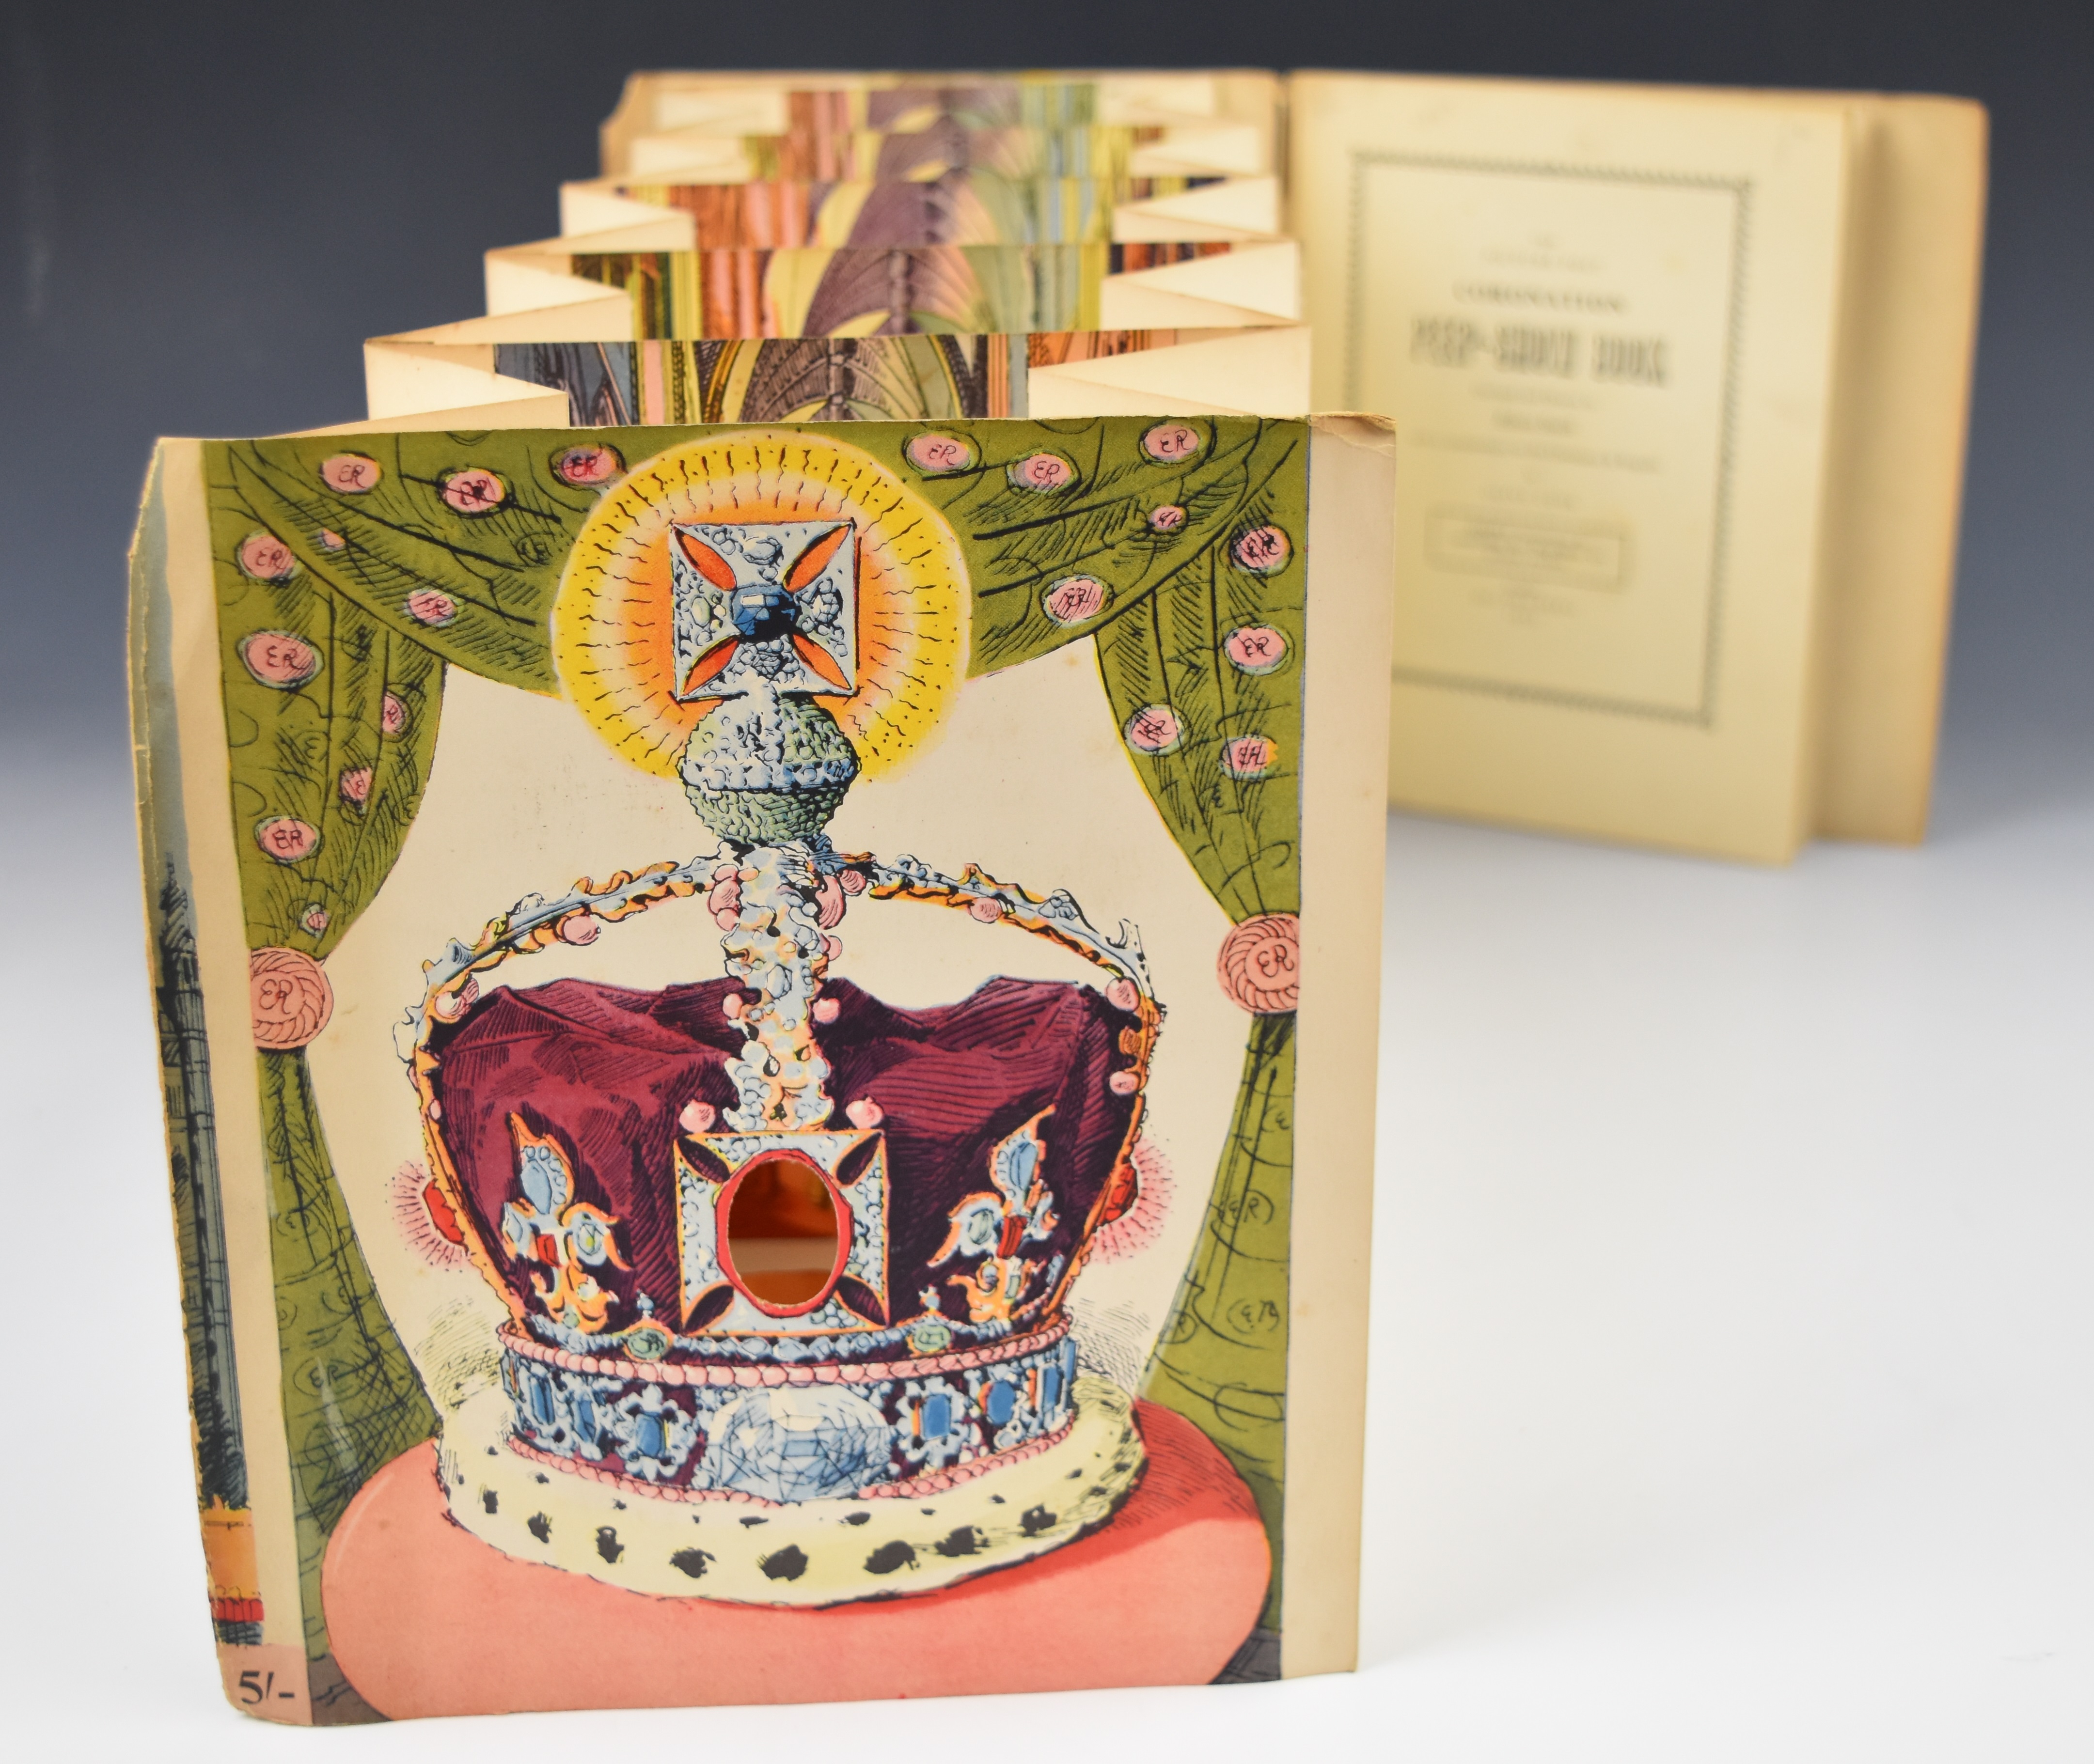 [Peep-Show] The Picture Post Coronation Peep-Show Book, Devised & Drawn by Edwin Smith with a - Image 2 of 4